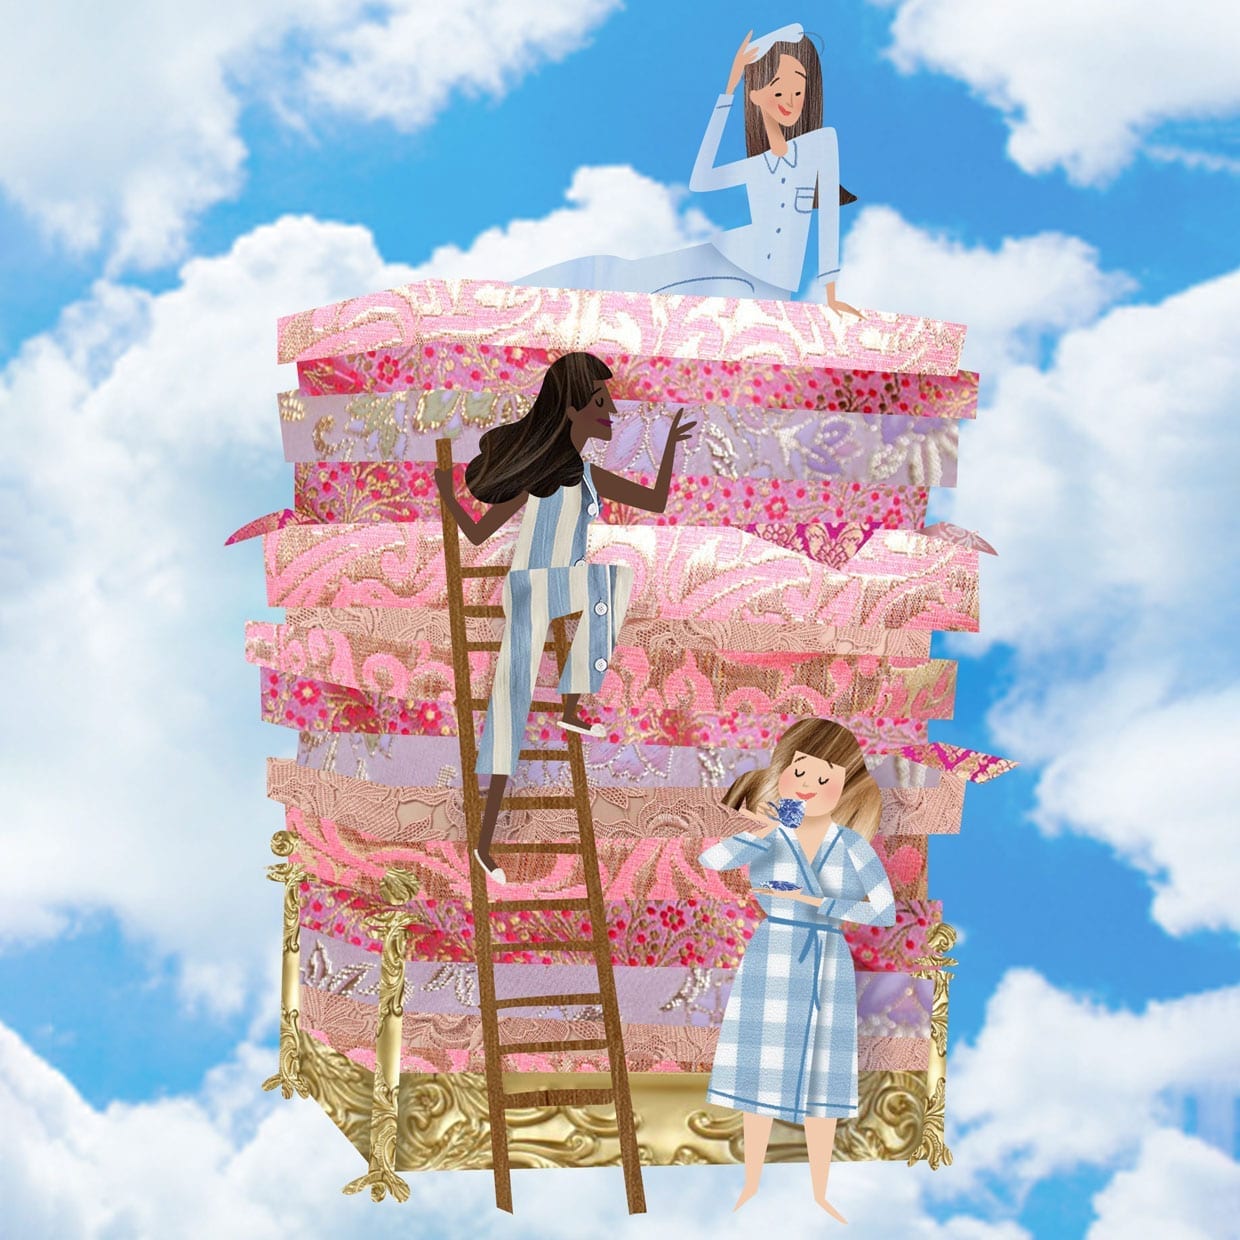 An illustration of three women and a pile of mattresses on a bed.